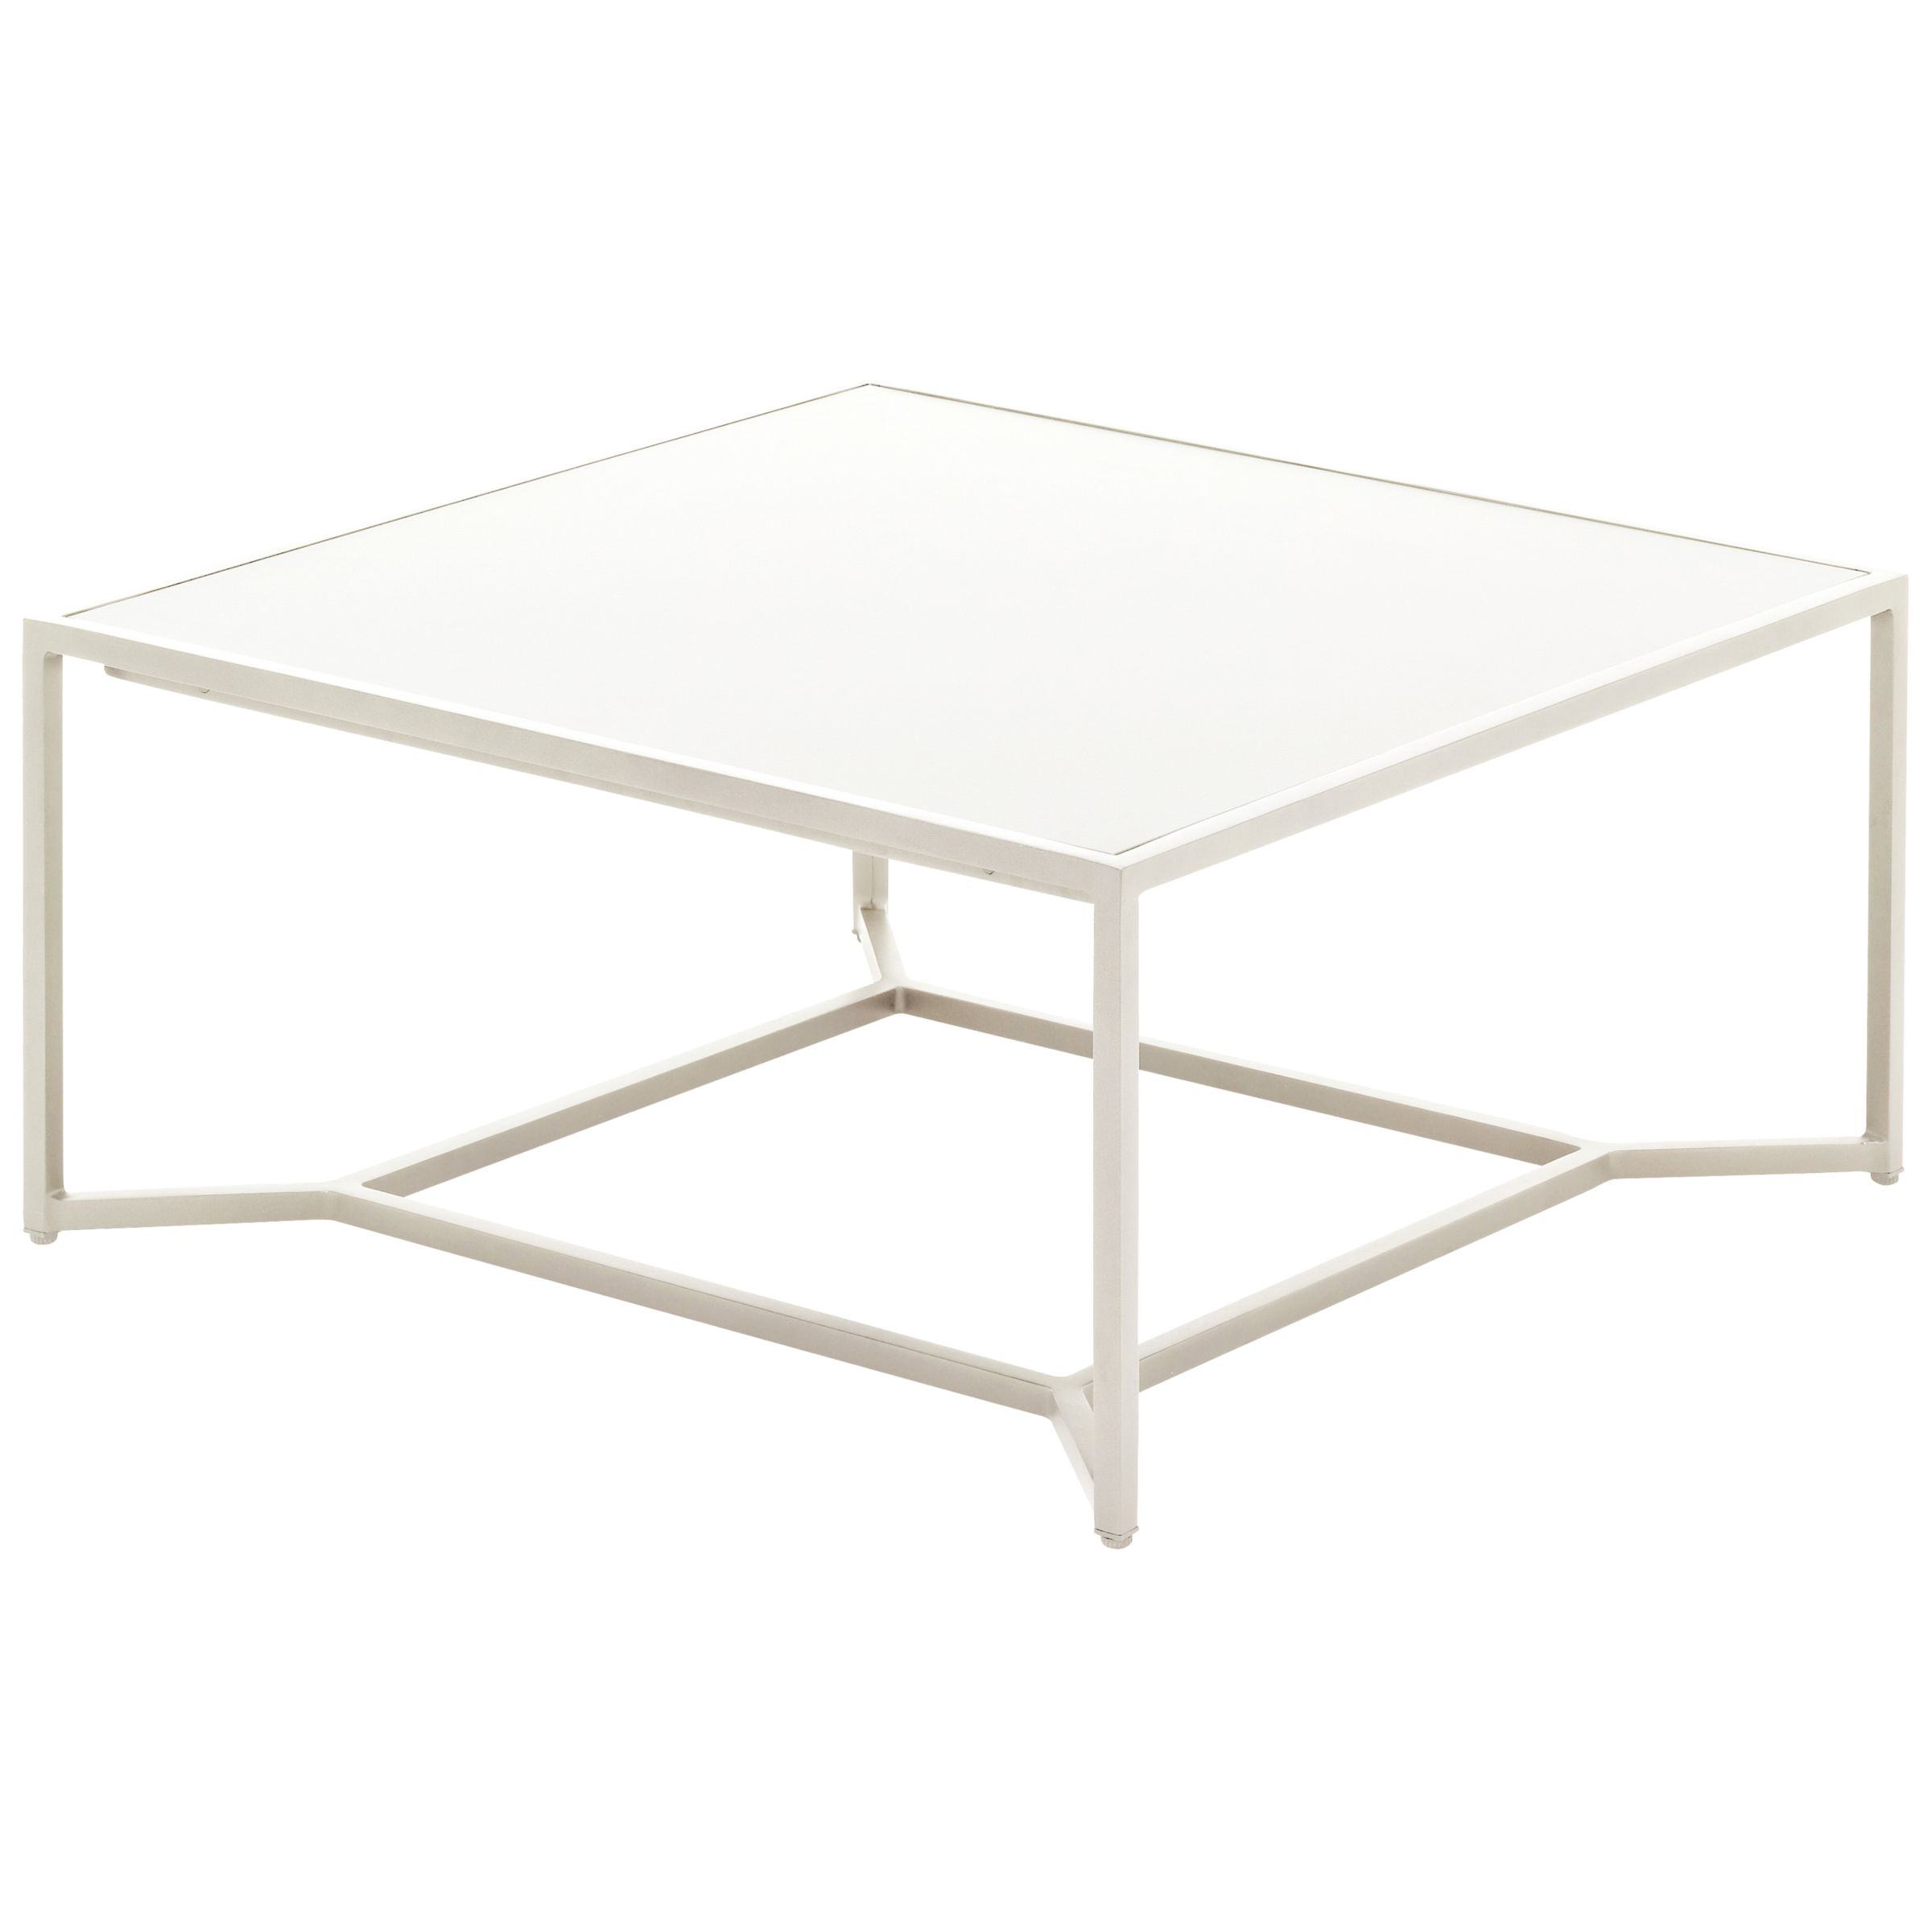 Gloster Bloc High Square Outdoor Coffee Table, White, 90 x 90cm, width 90cm